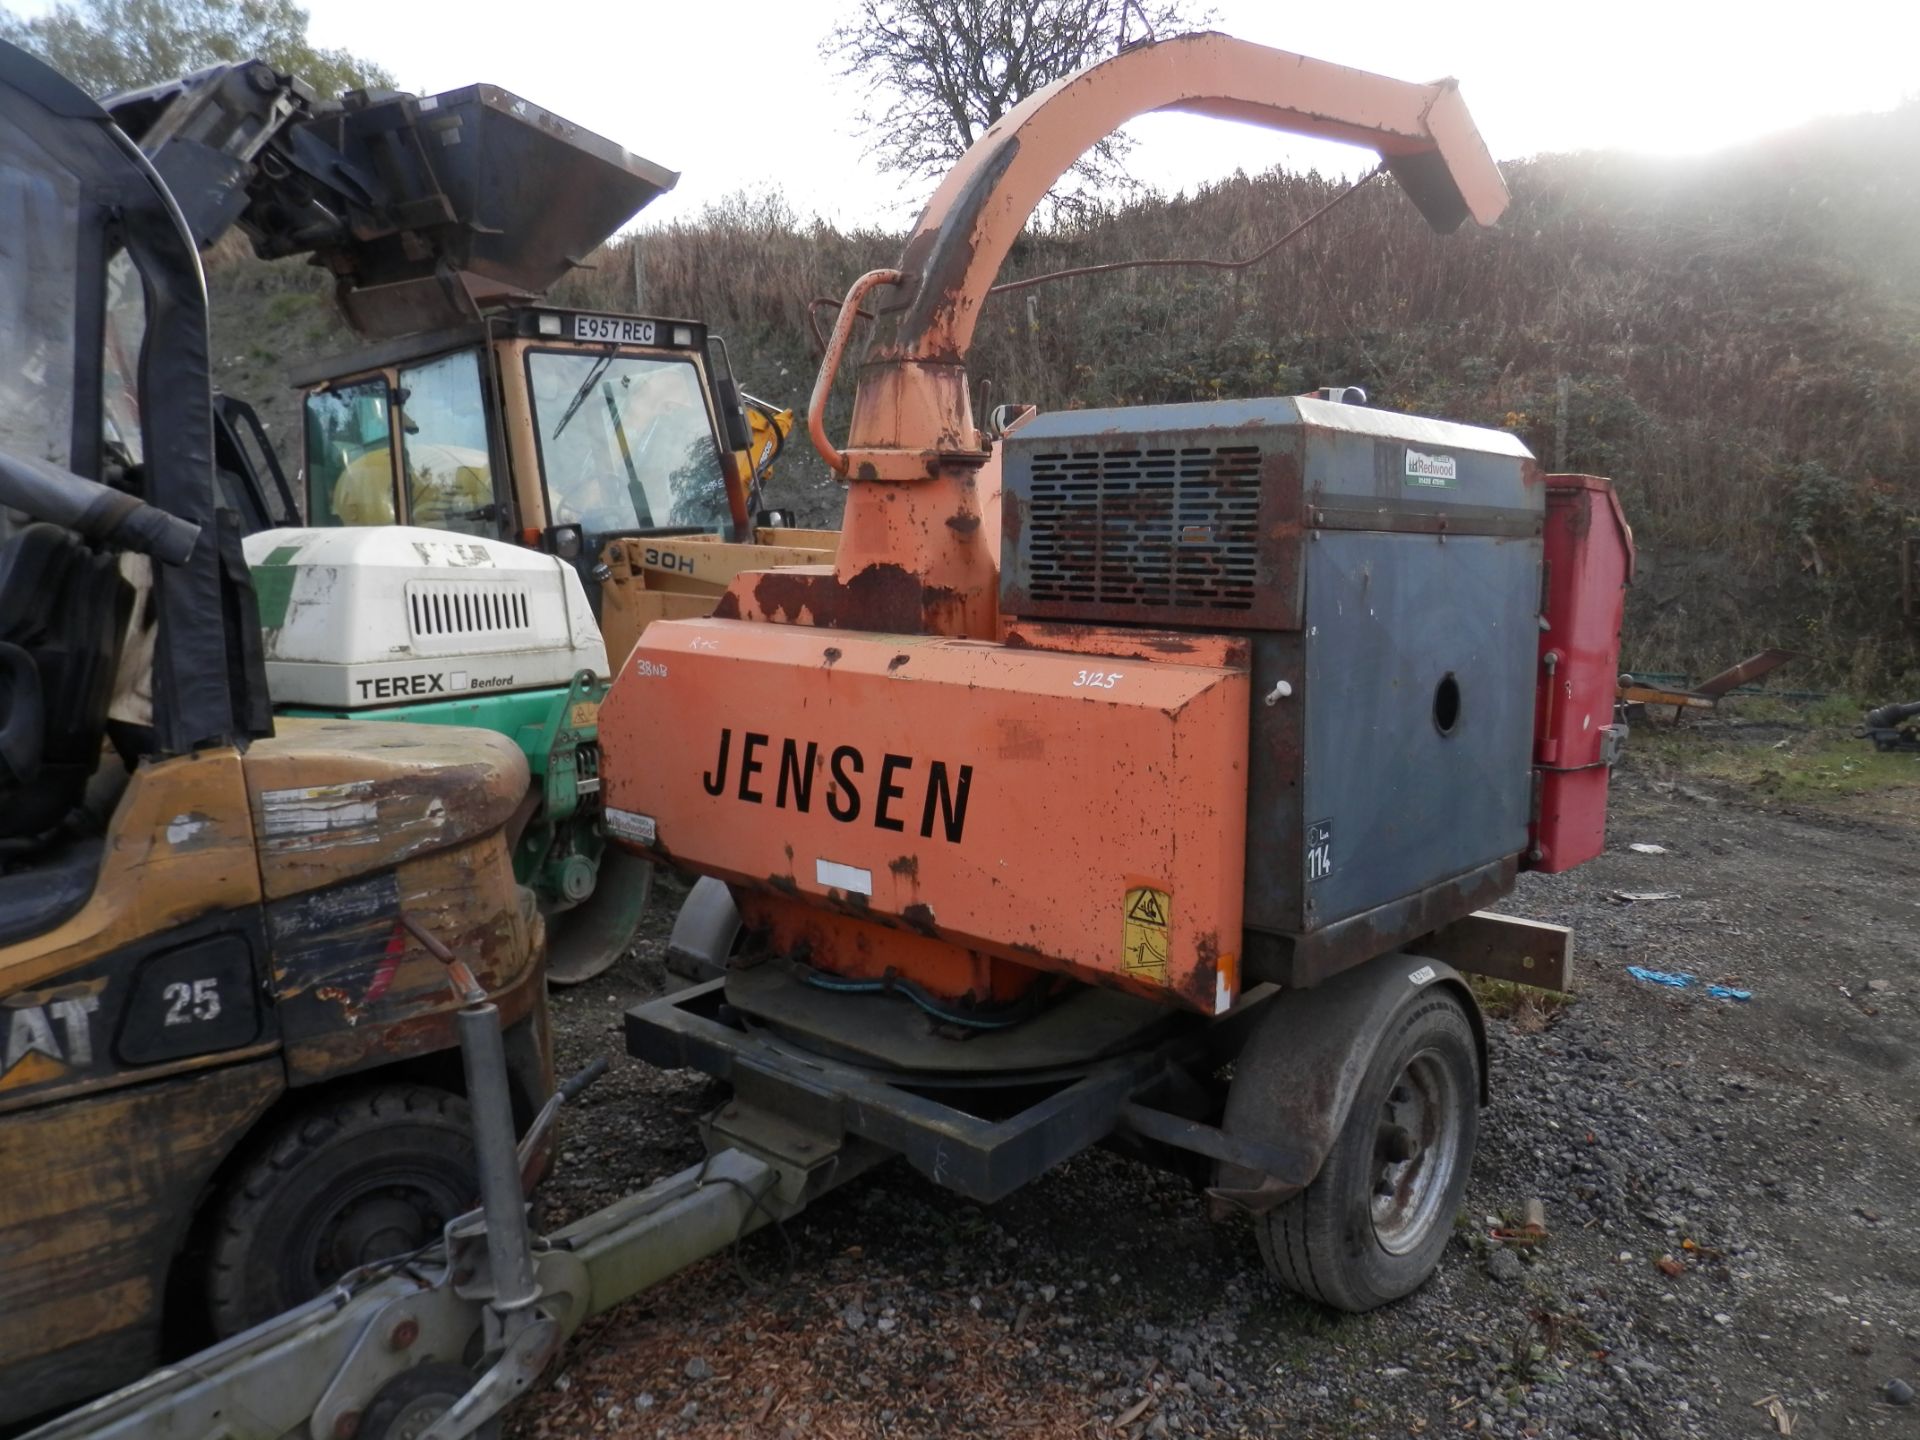 DS - QUALITY 2004 JENSEN DIESEL TURNTABLE CHIPPER, QUALITY TRAILER - Image 7 of 7